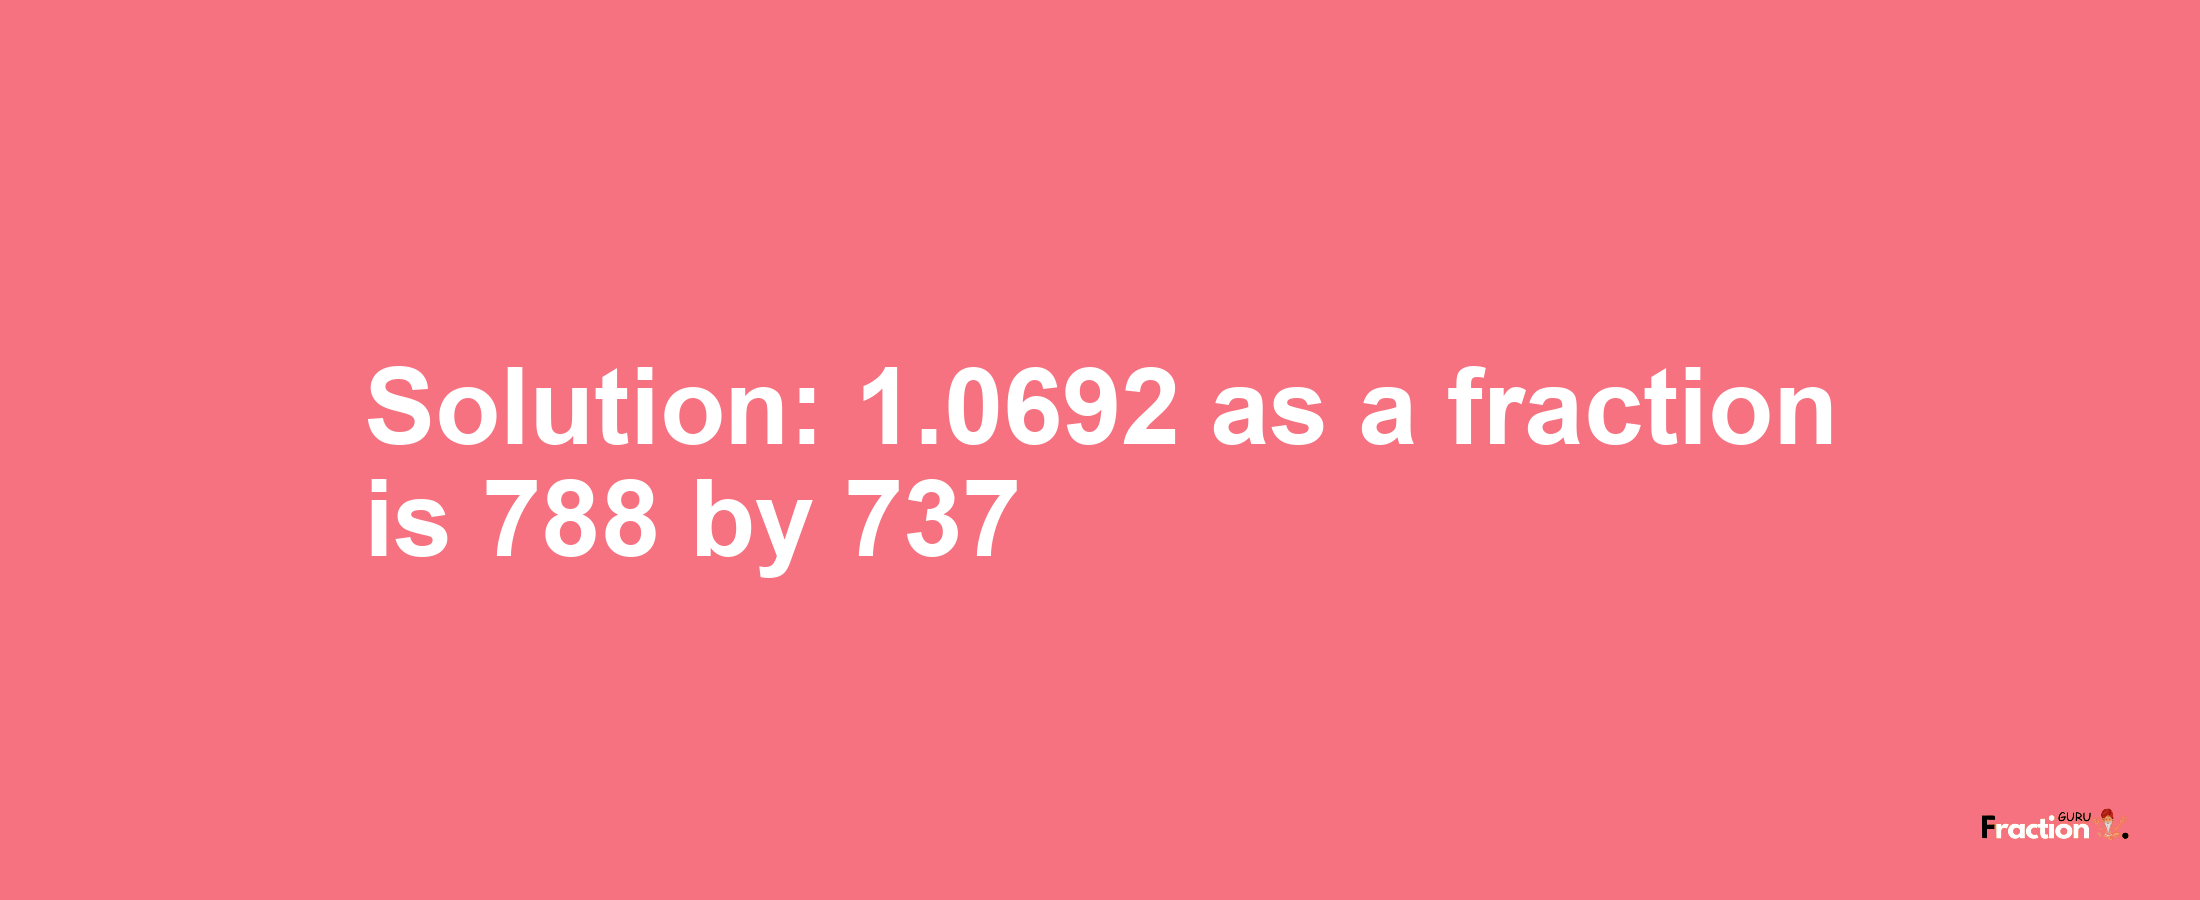 Solution:1.0692 as a fraction is 788/737